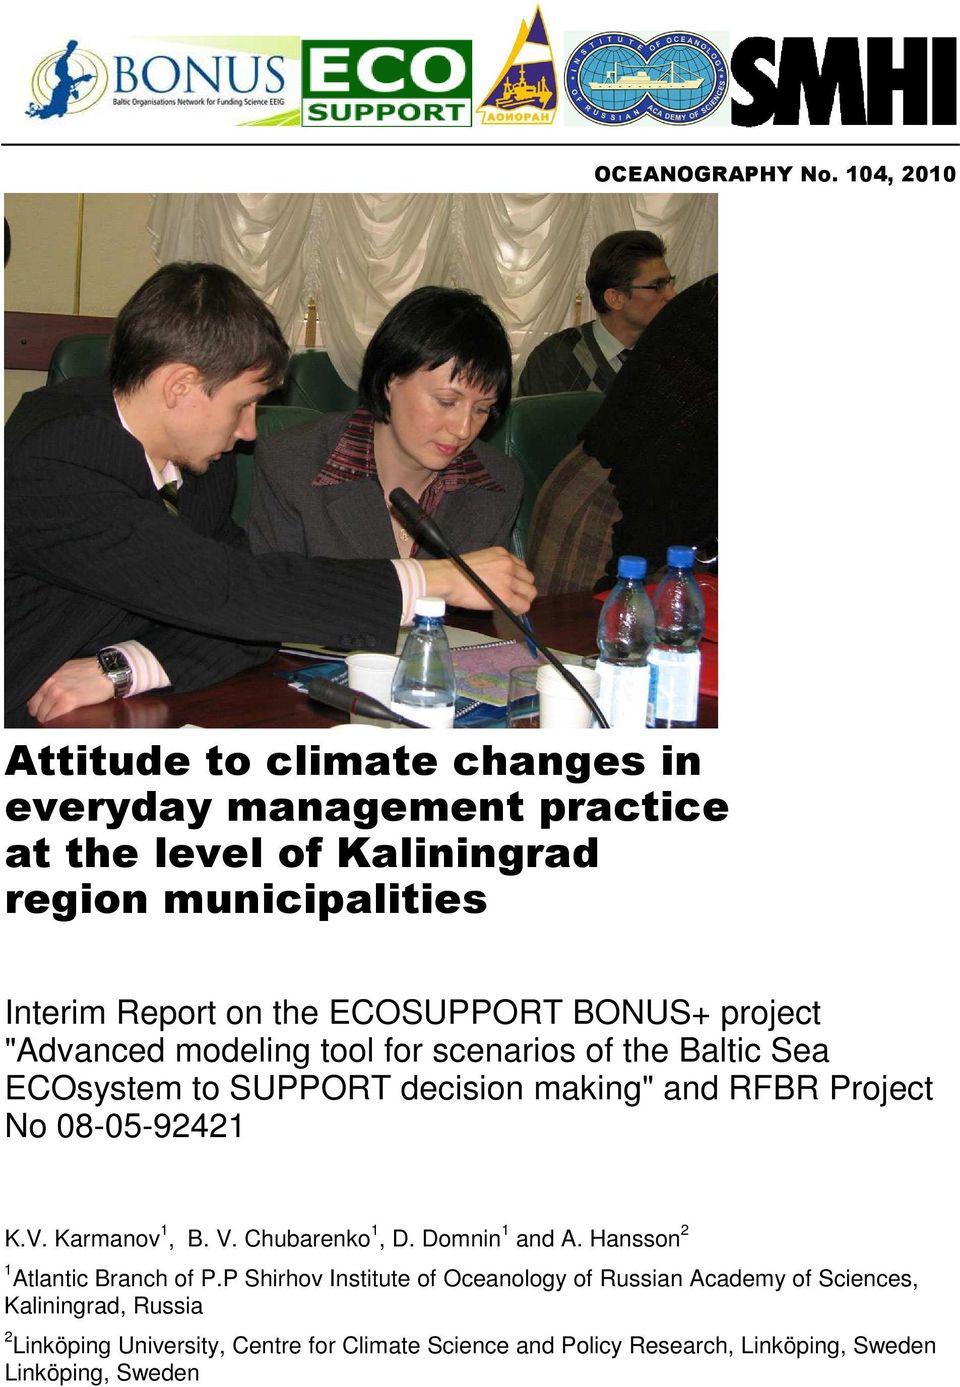 ECOSUPPORT BONUS+ project "Advanced modeling tool for scenarios of the Baltic Sea ECOsystem to SUPPORT decision making" and RFBR Project No